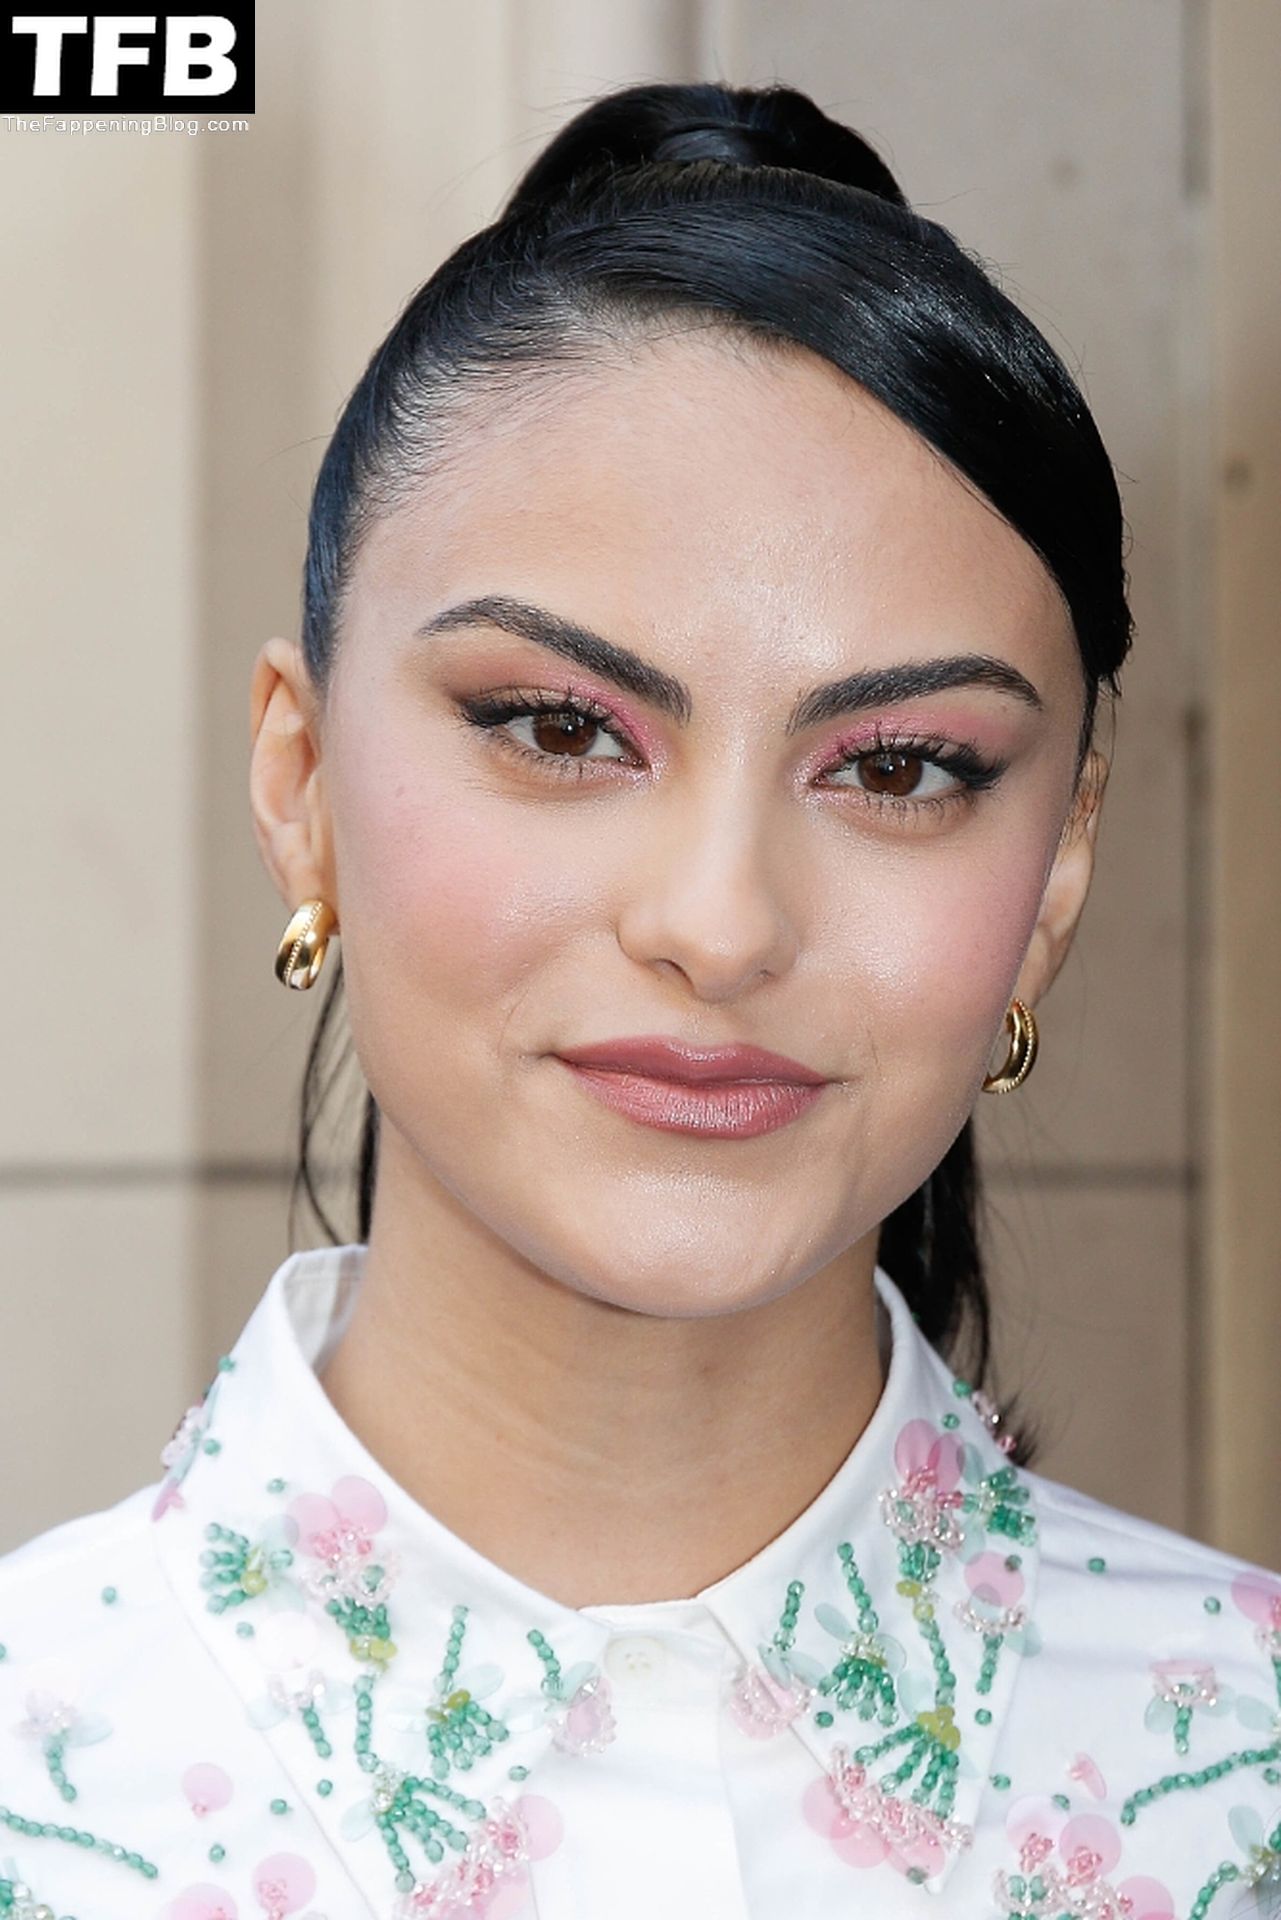 Camila-Mendes-Sexy-The-Fappening-Blog-56.jpg